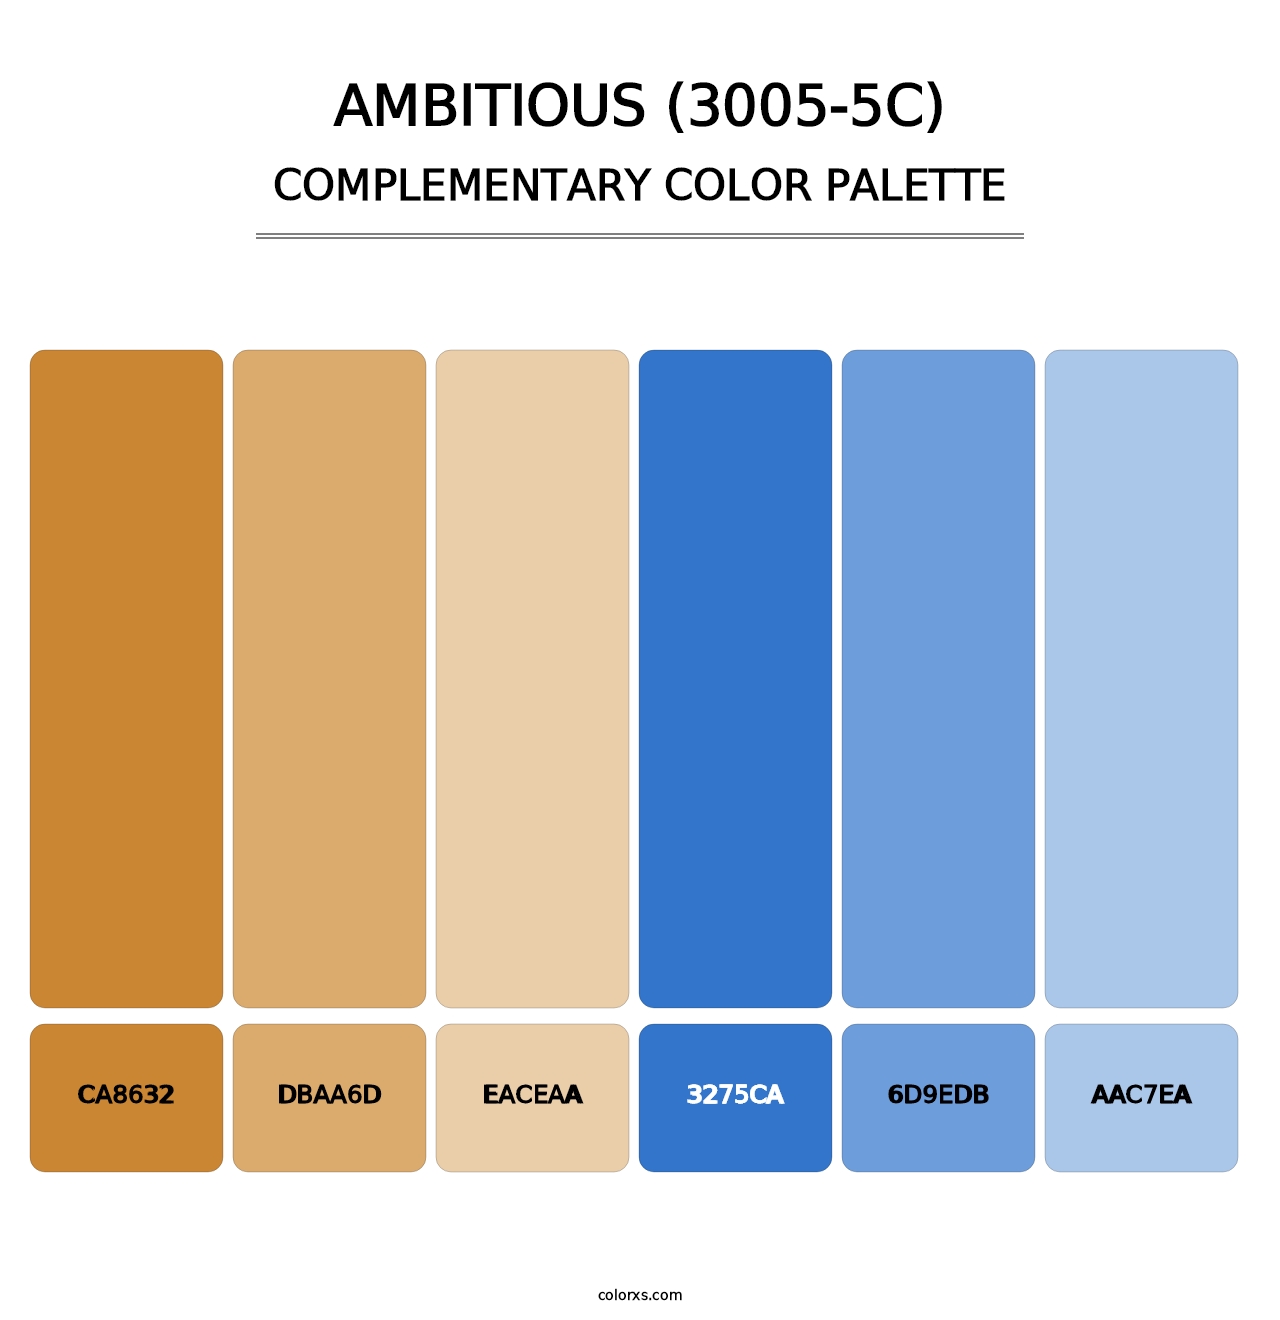 Ambitious (3005-5C) - Complementary Color Palette